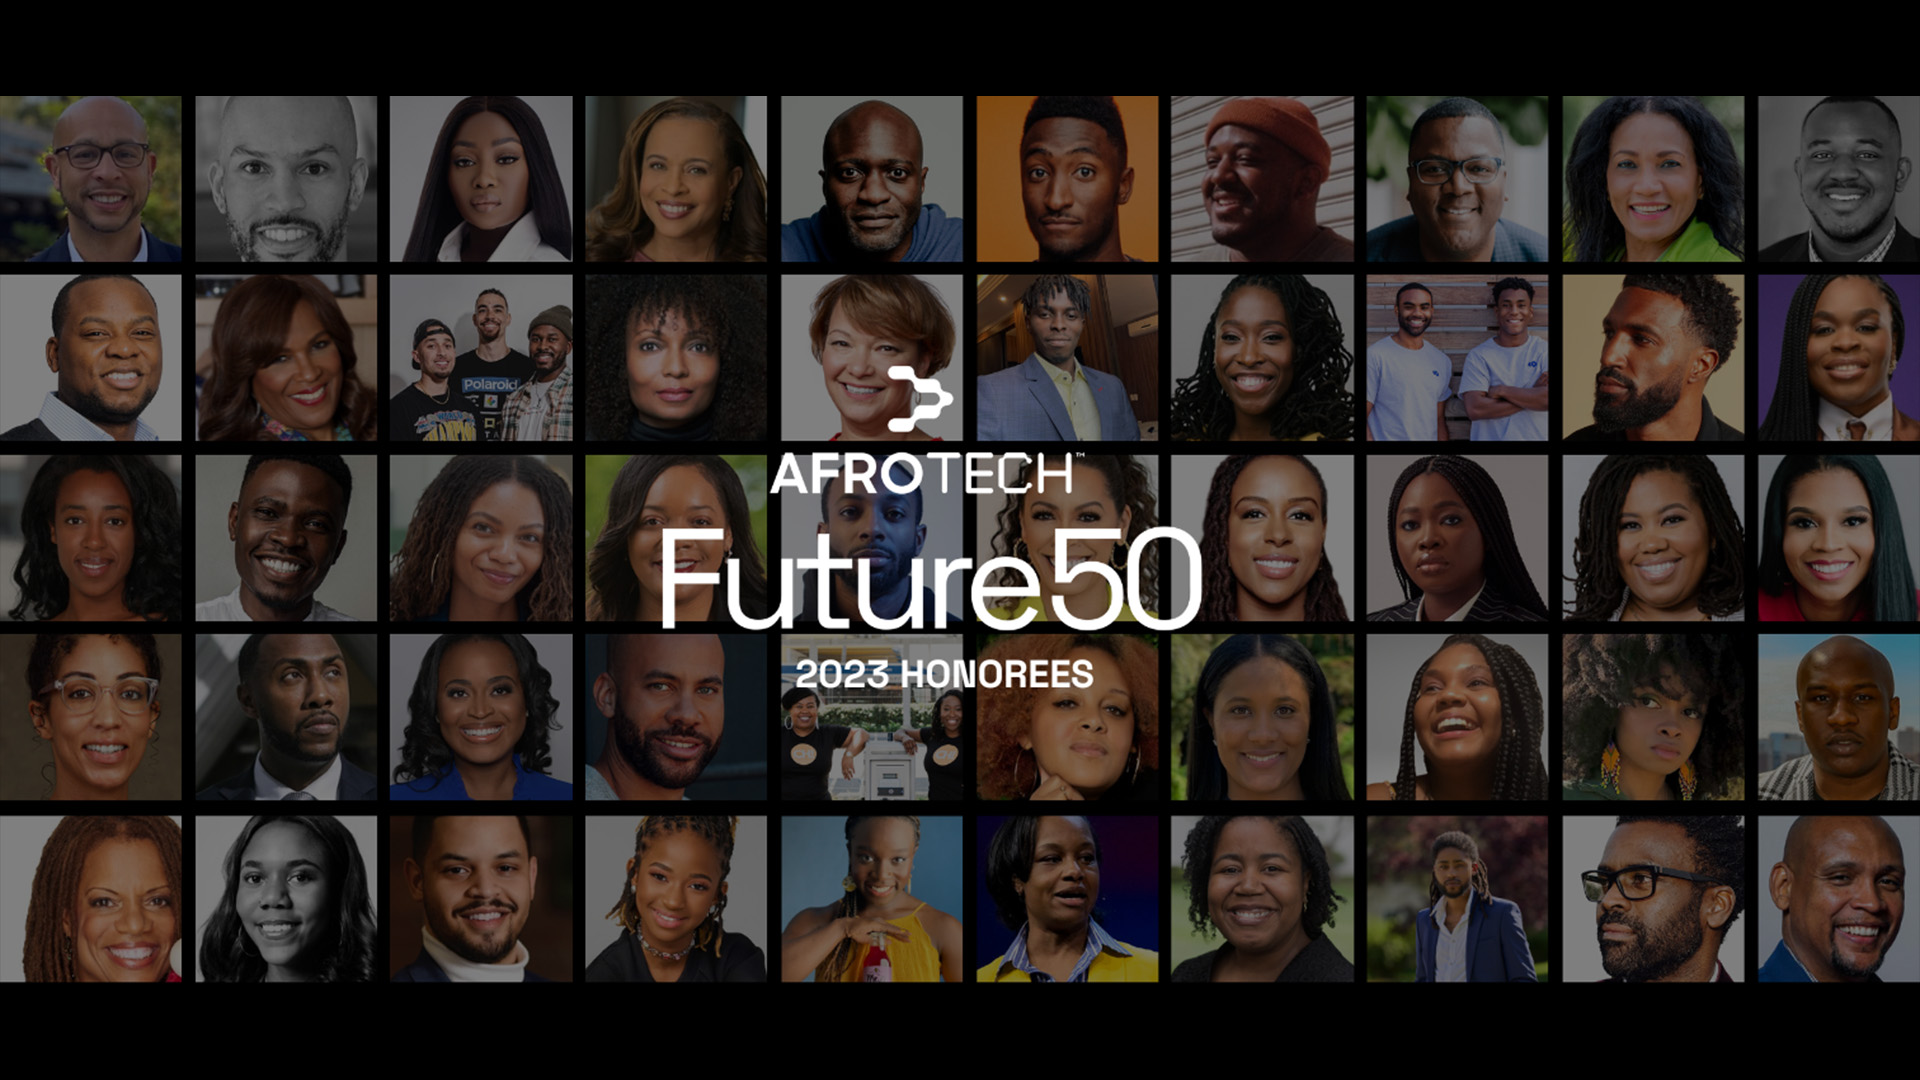 We're Back And Bigger: The AFROTECH™ Future 50 Honorees For 2023 Are In